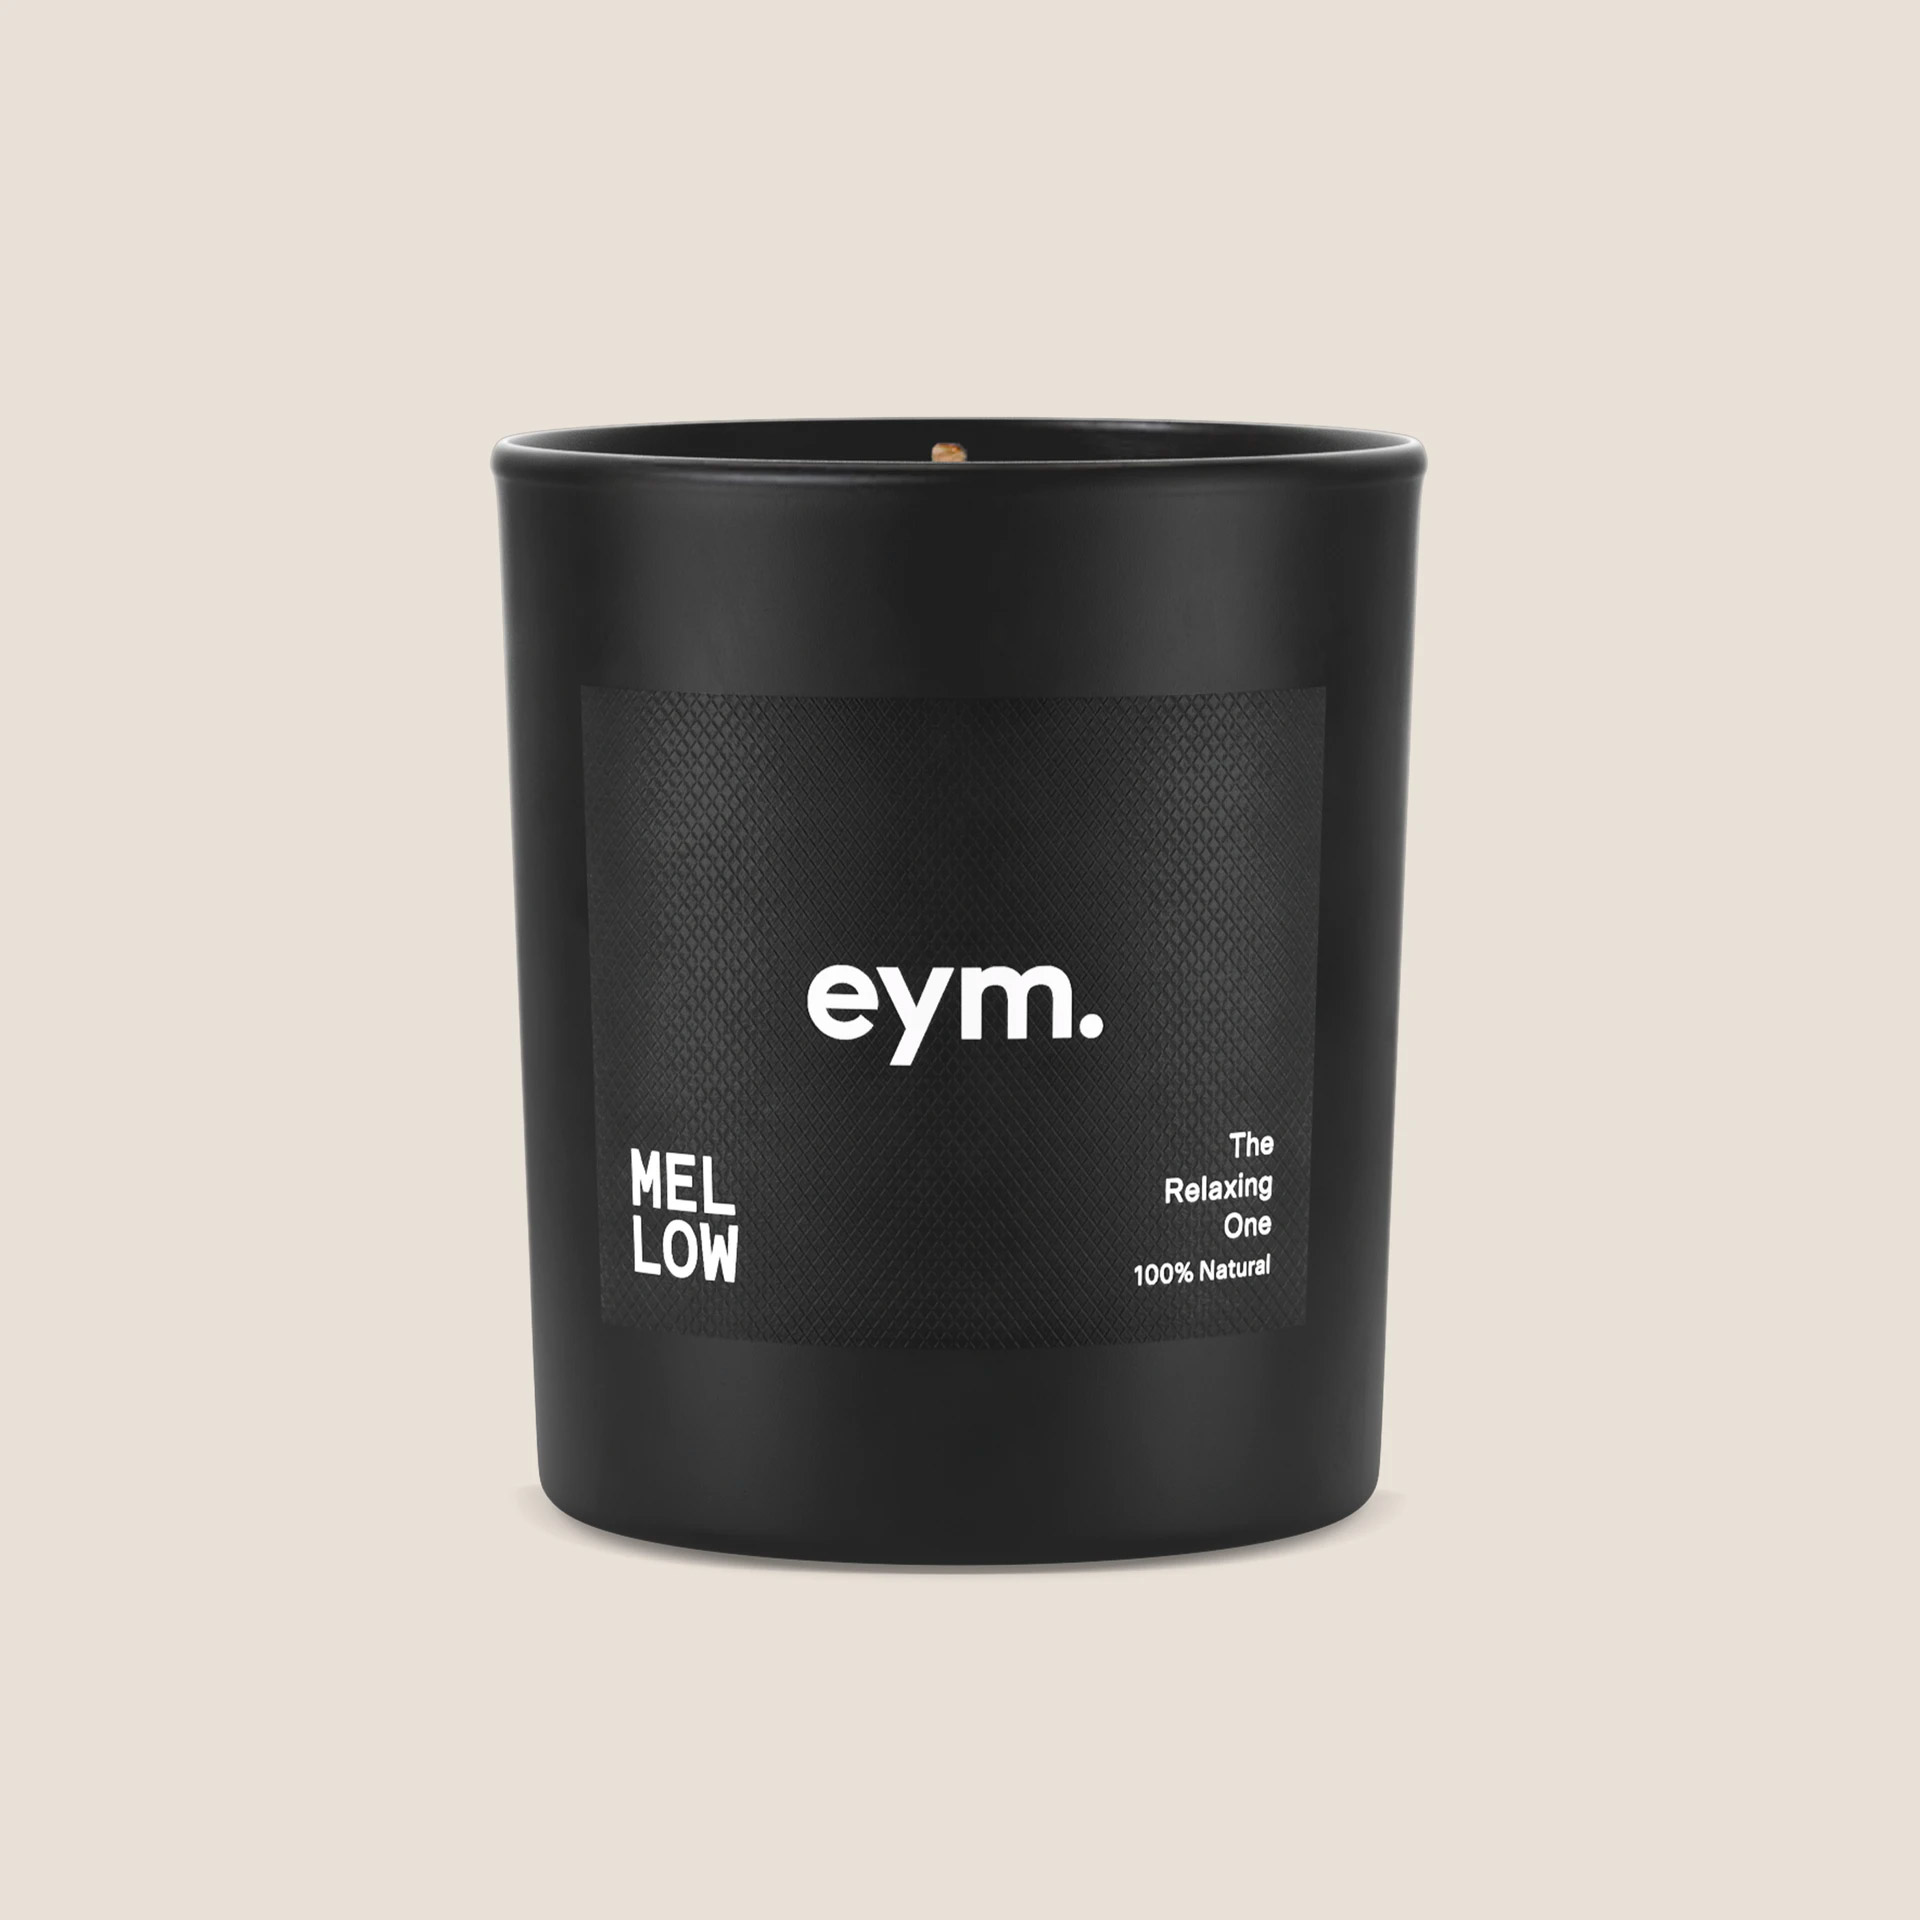 Eym Mellow Candle - Standard